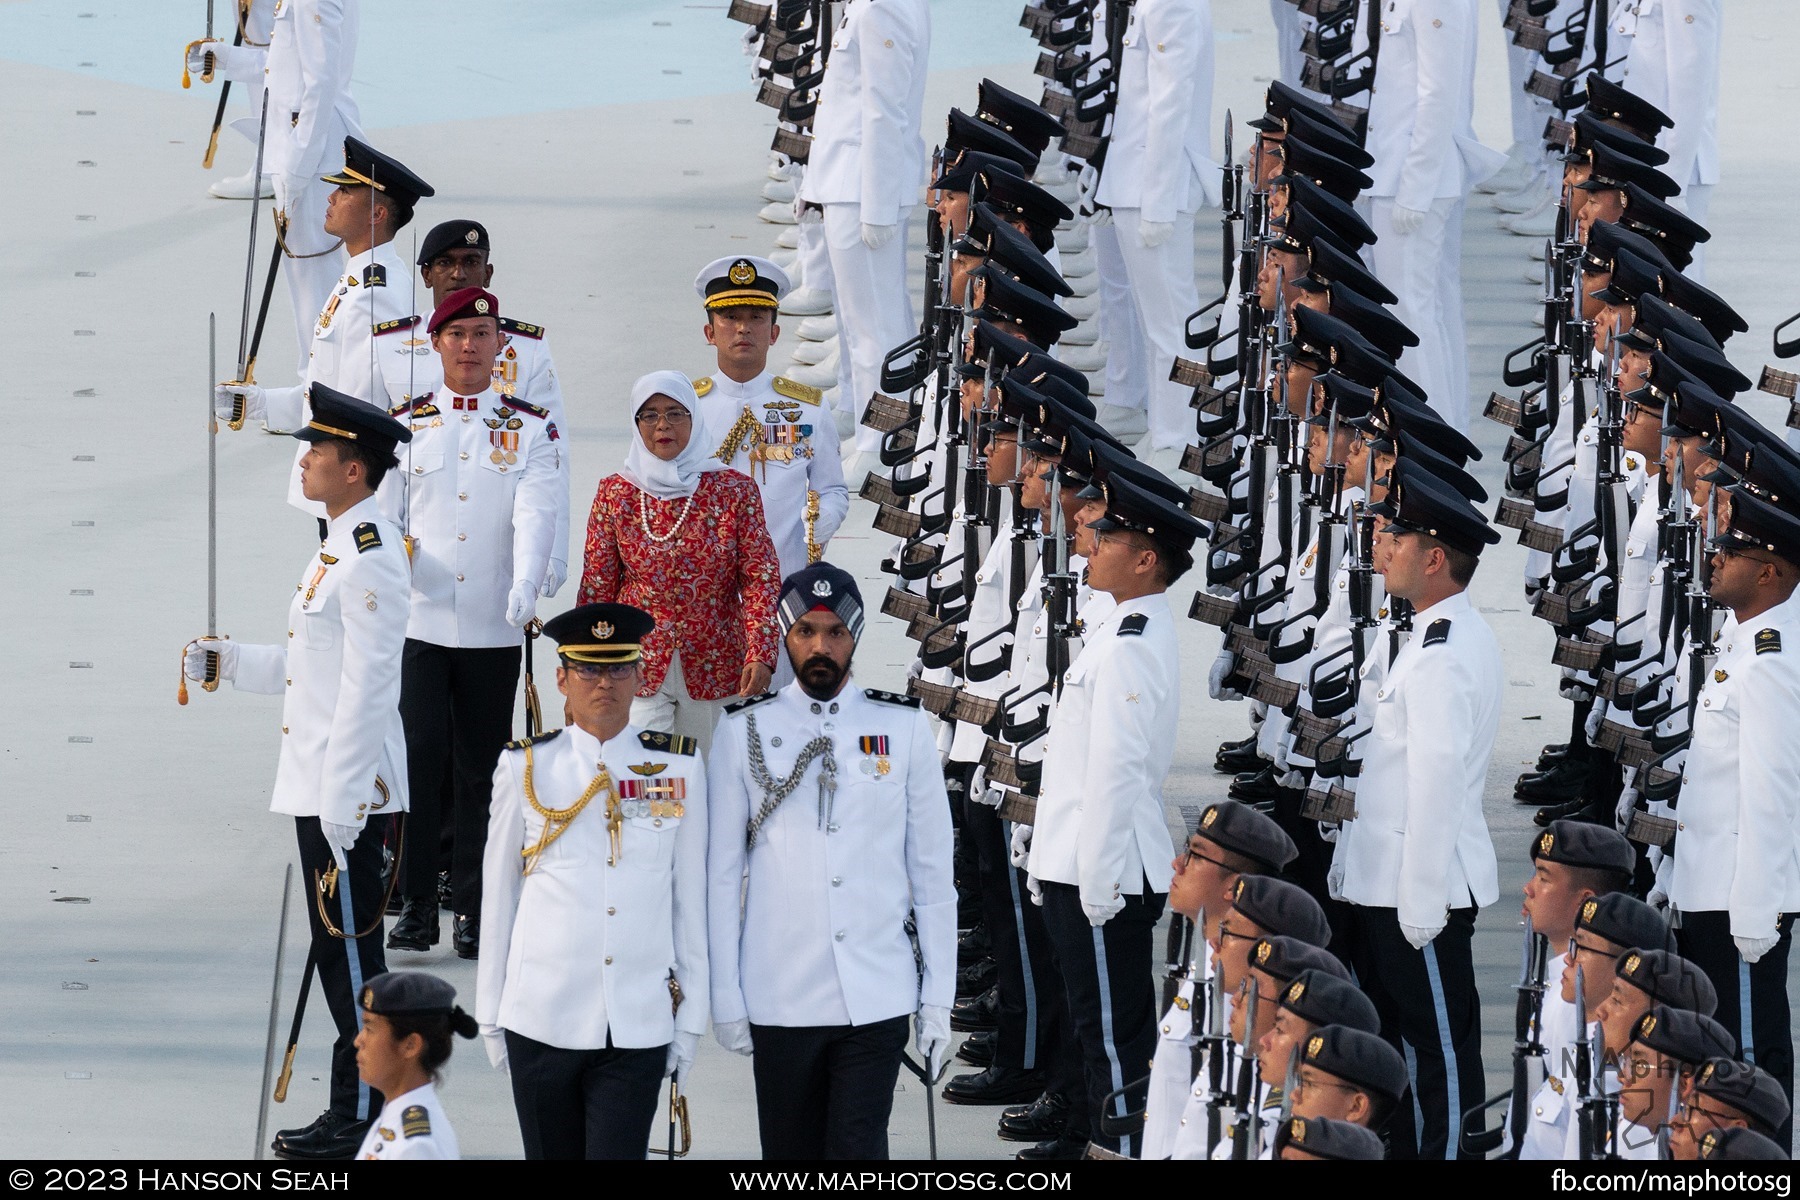 President of SIngapore, Mdm Halimah Yacob, inspects the Guard-of-Honour